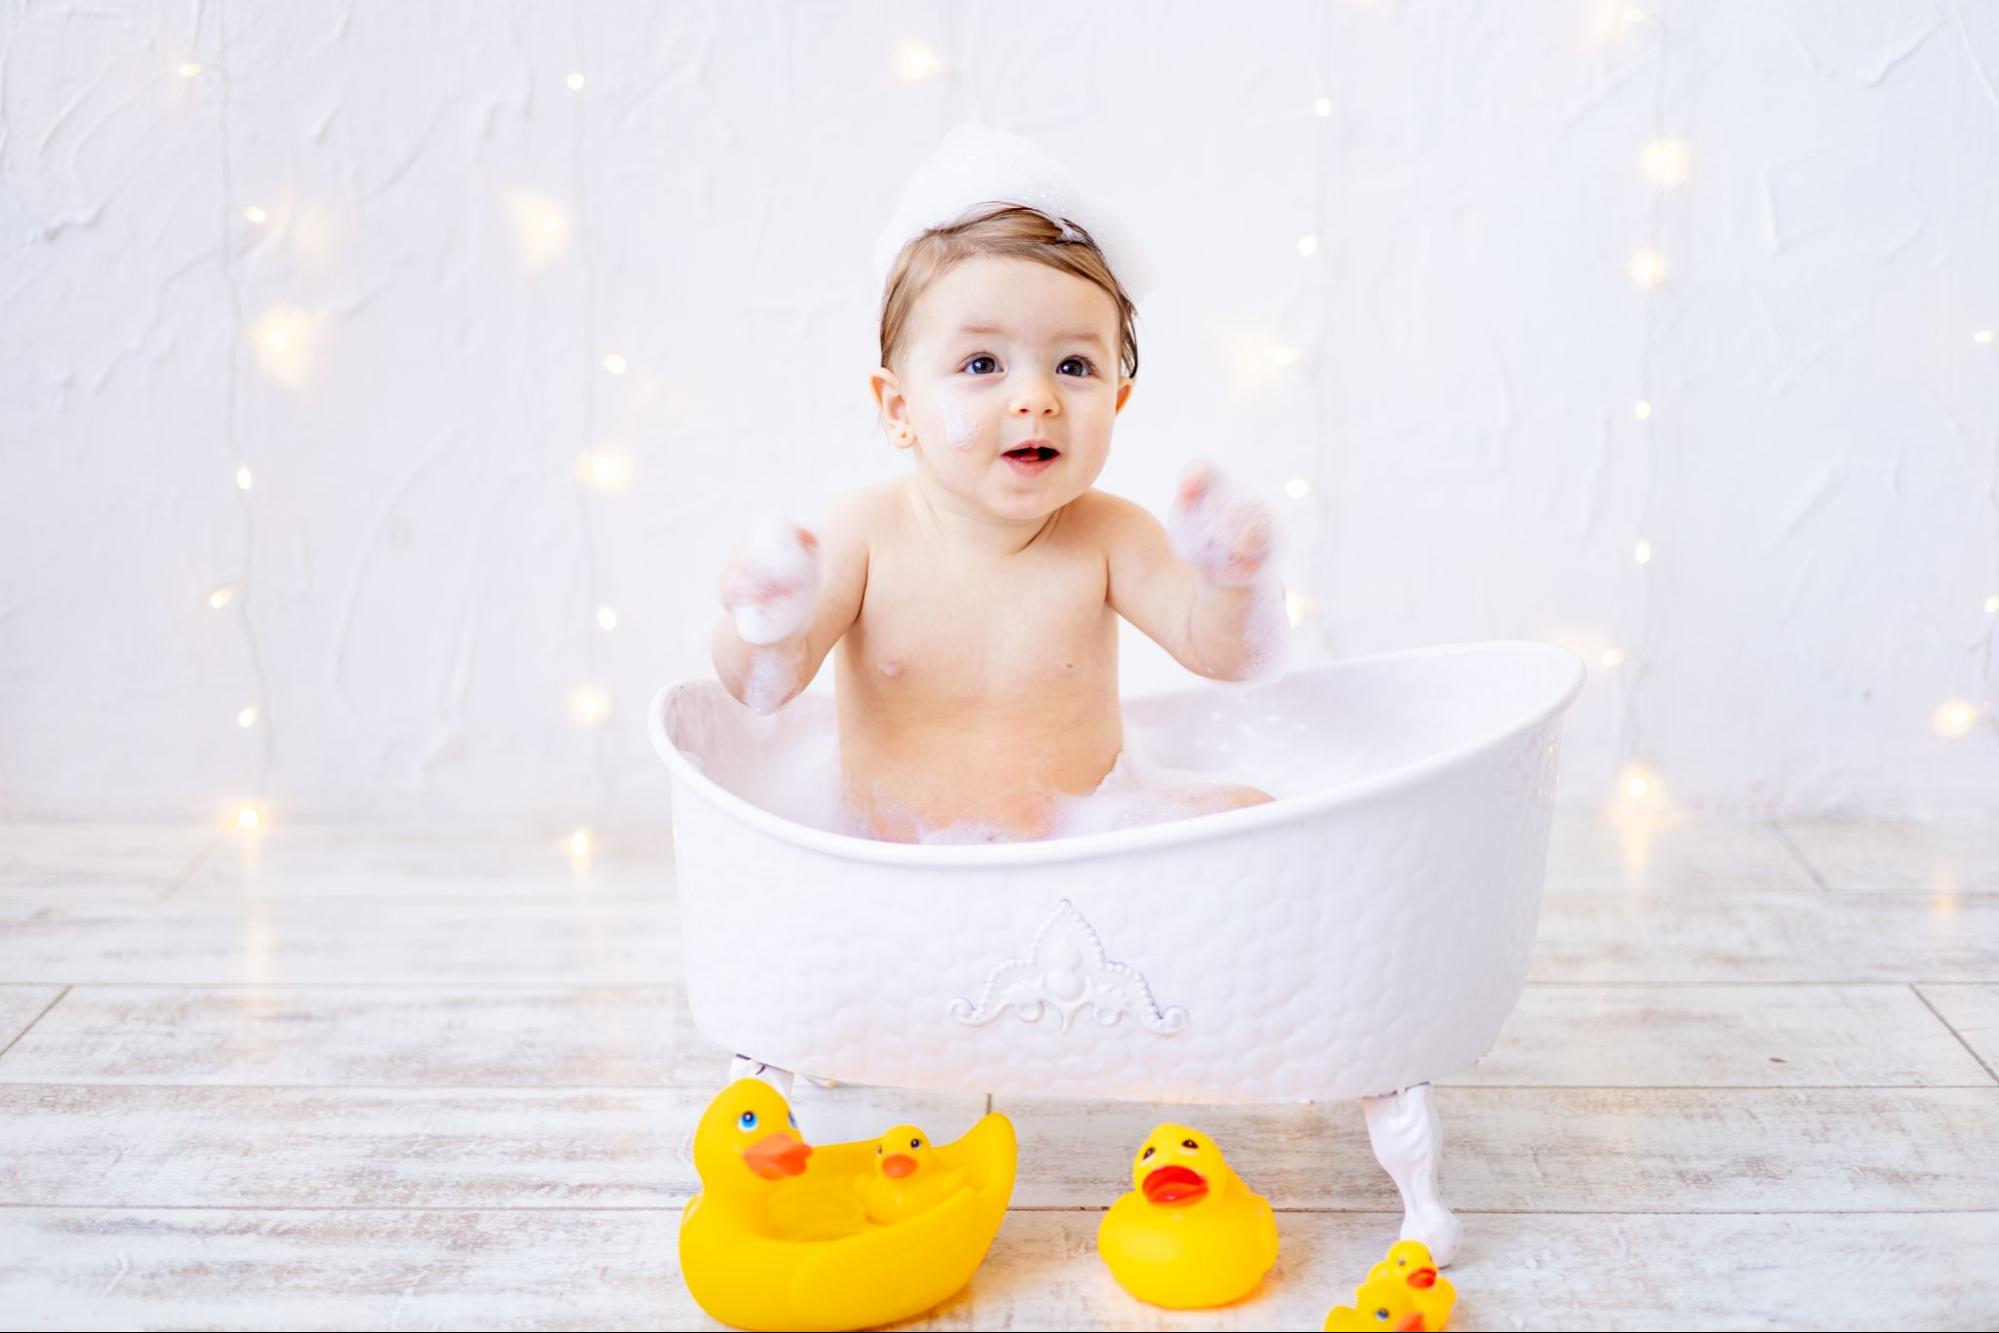 Baby in bathtub, surrounded by bubbles, capturing pure delight and playfulness